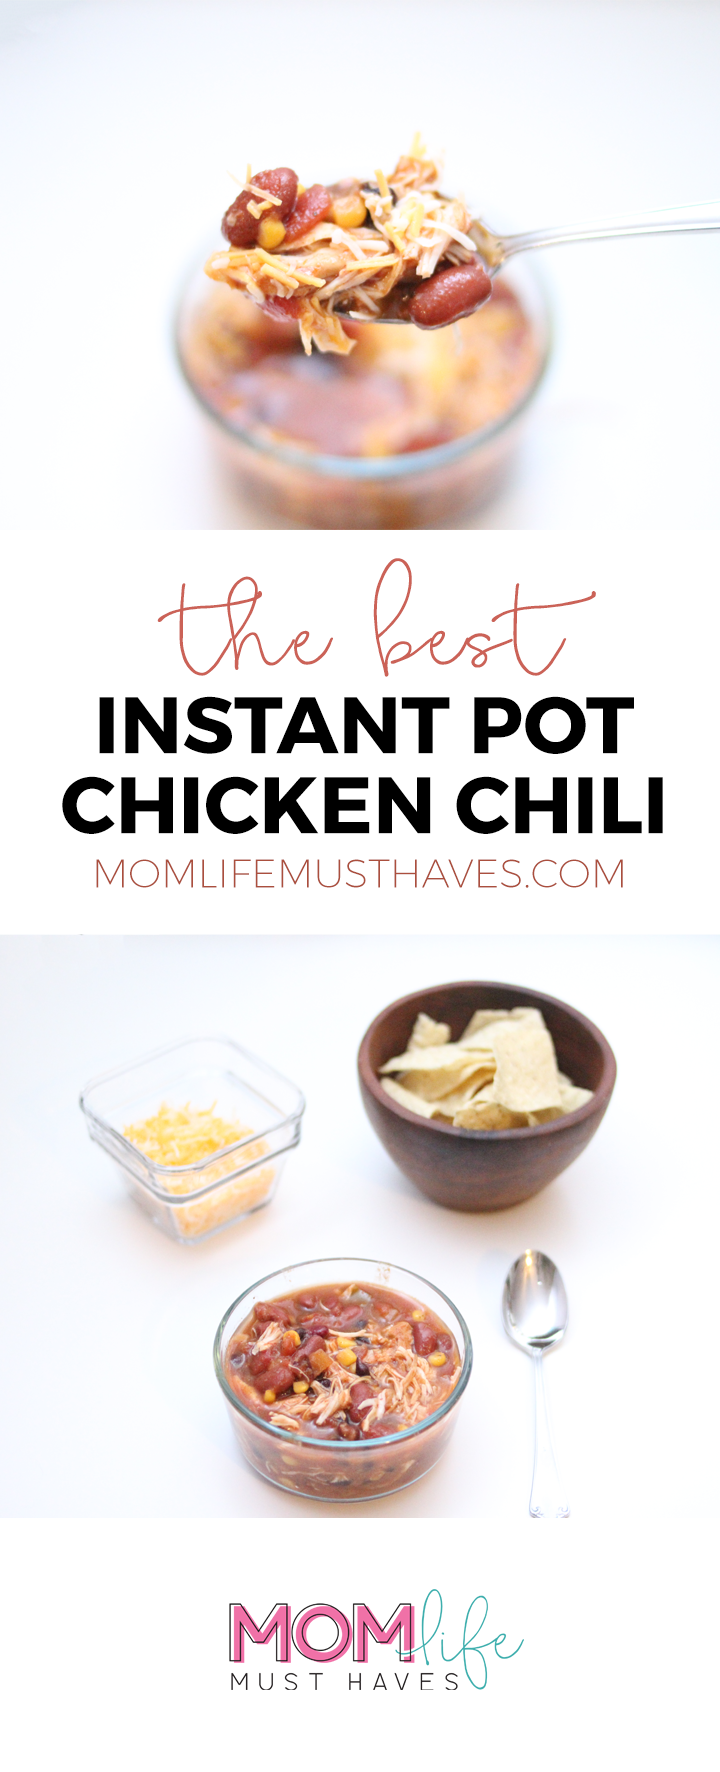 The best instant pot chicken chili recipe || An easy chili recipe the whole family will love at momlifemusthaves.com